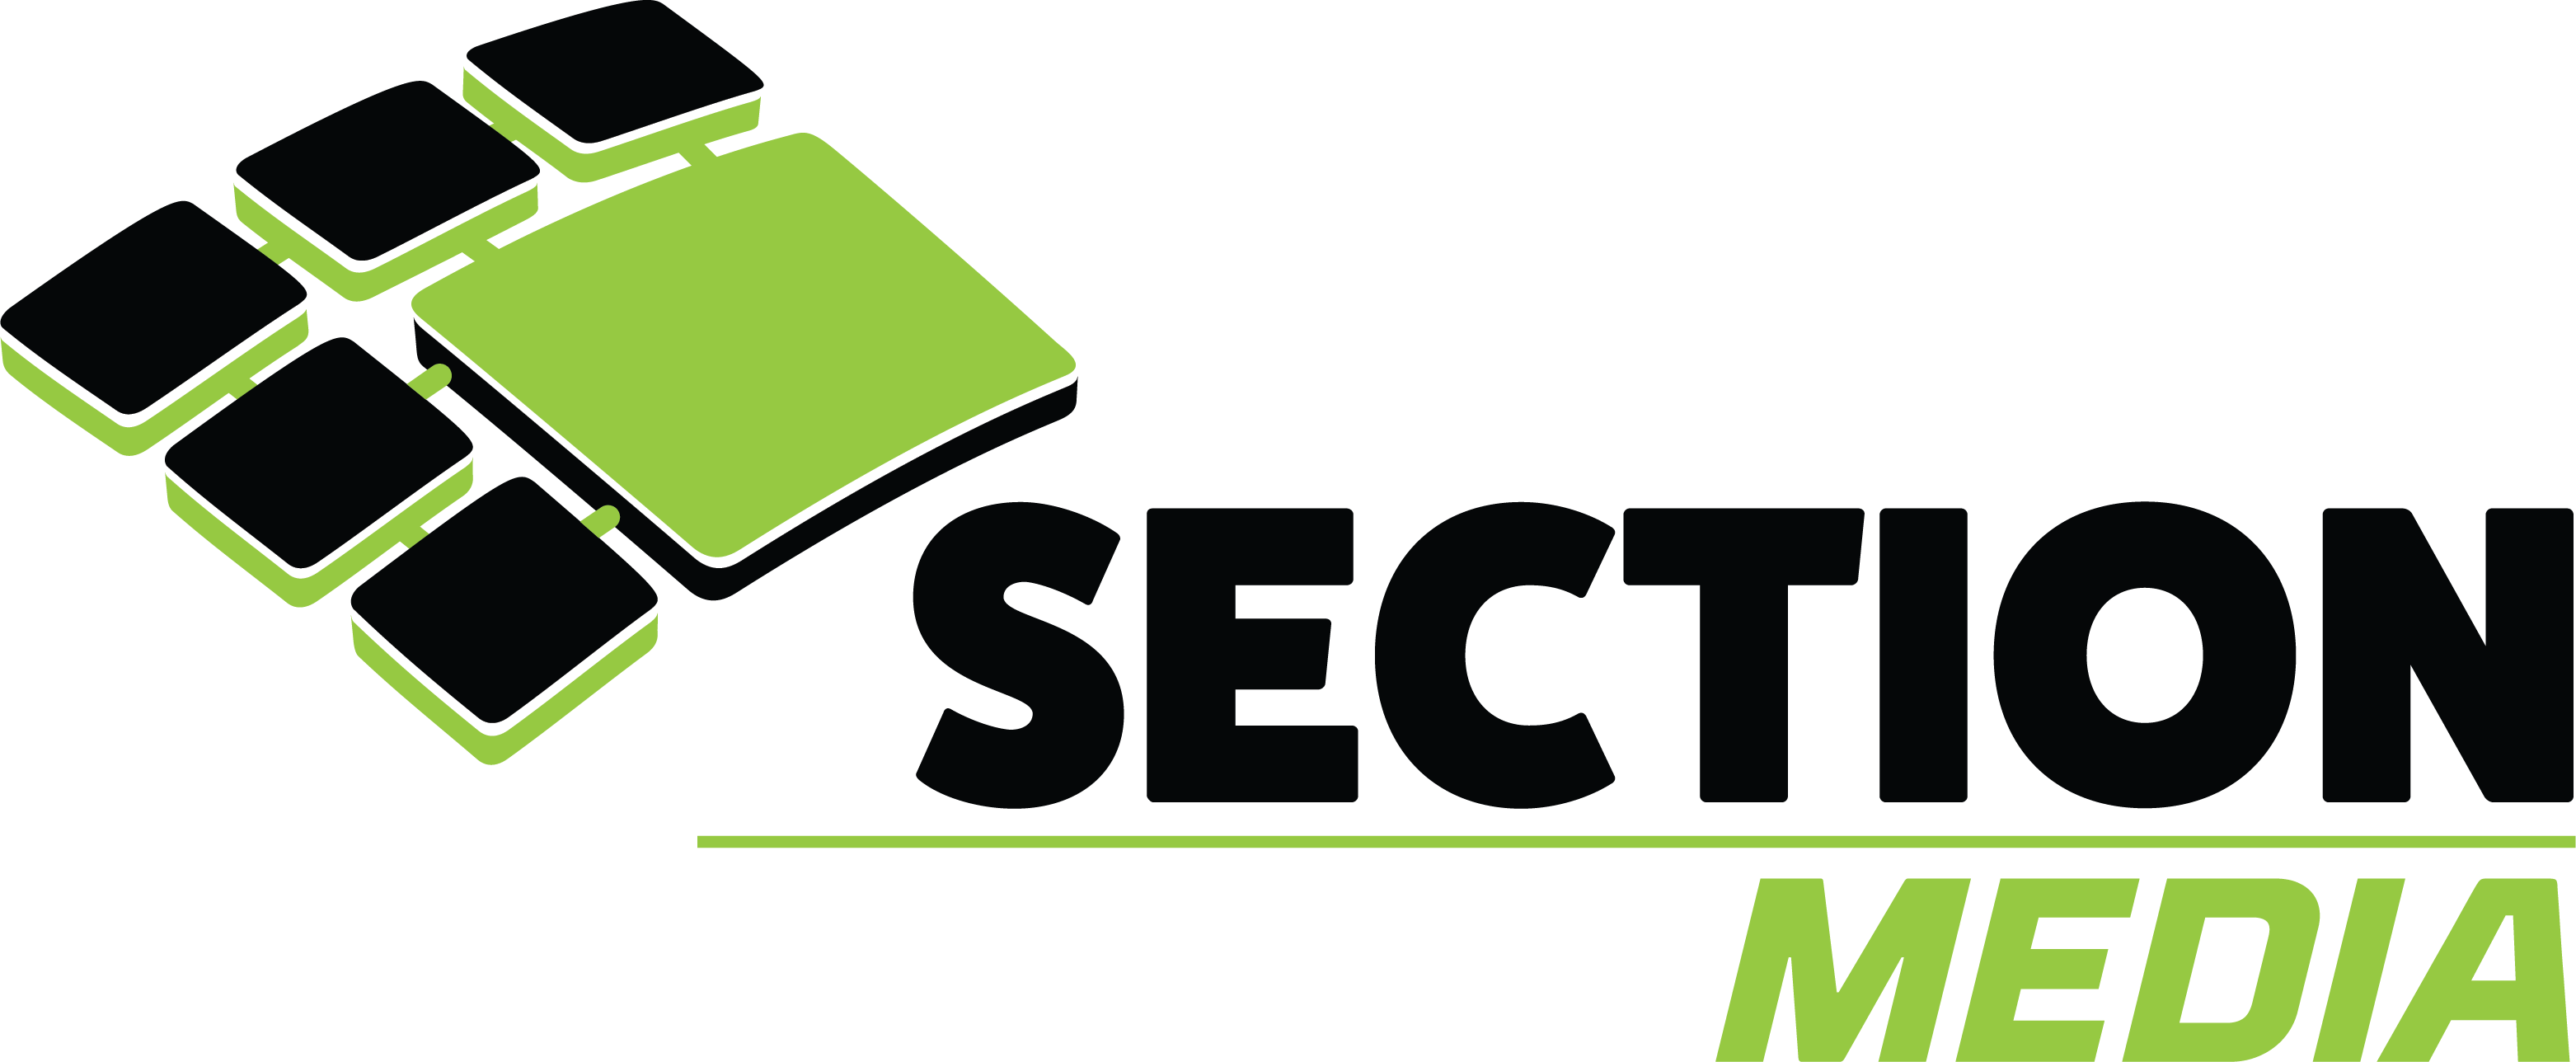 Section Media Logo. Click here to go back to home page